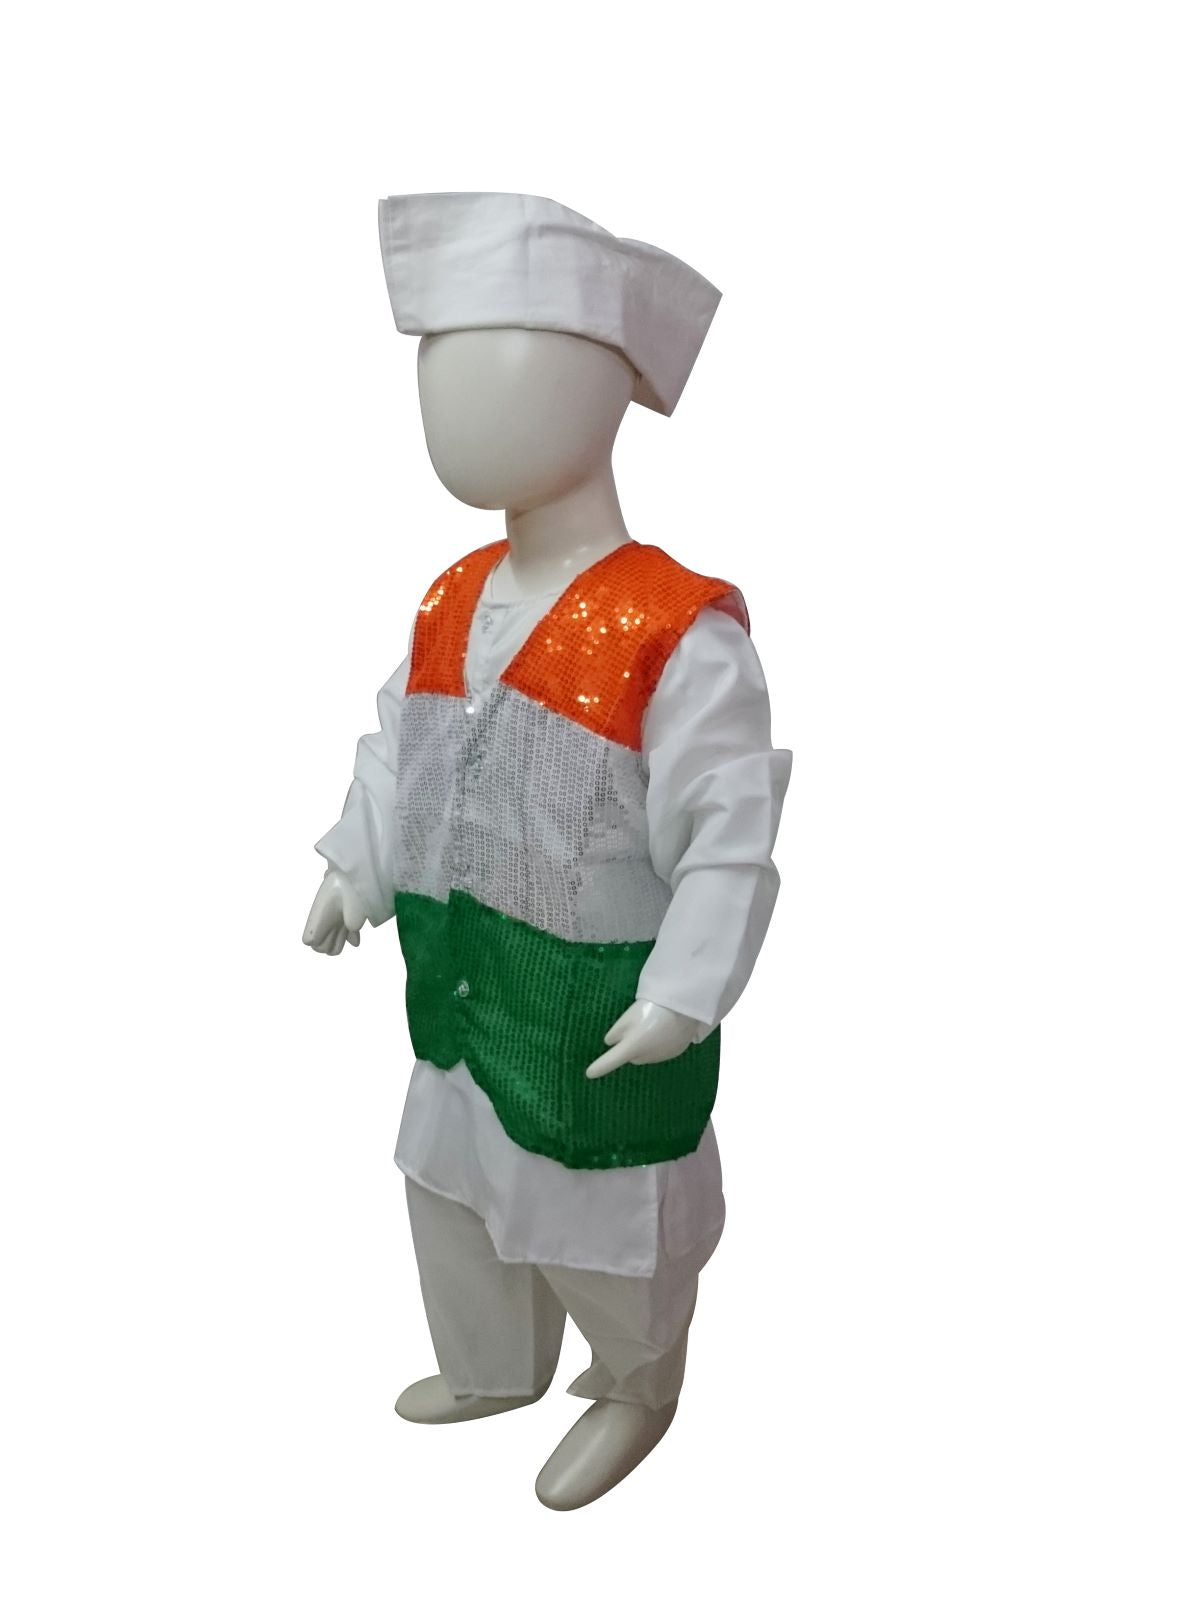 Buy Polyester Blend Kkalakriti Dr. Bhimrao Ambedkar Fancy Dress Costume For  Kids, Freedom Fighter, Indian Costitution Theme|Events,Freedom Fighter  Theme And Performance (4-6 Yrs), Multicolor Online at Low Prices in India -  Amazon.in